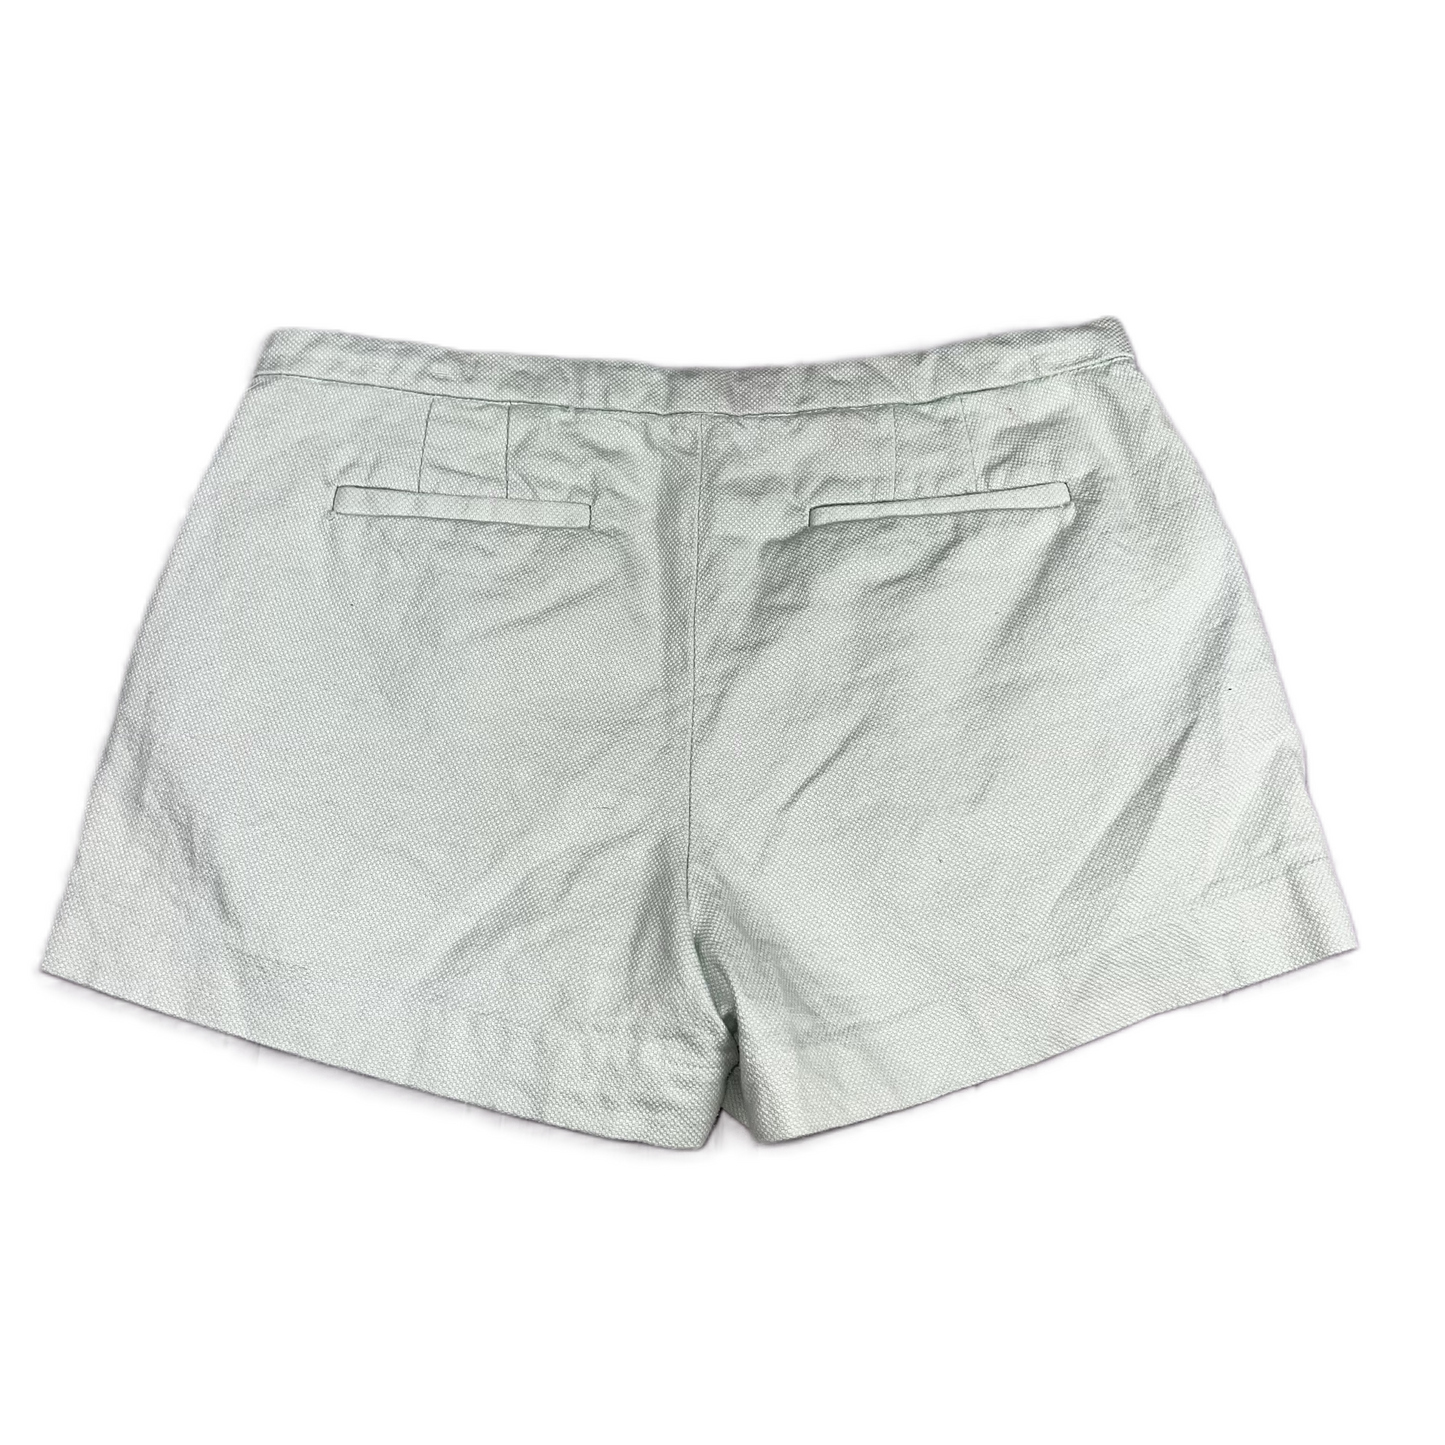 Green Shorts By J Crew, Size: 2